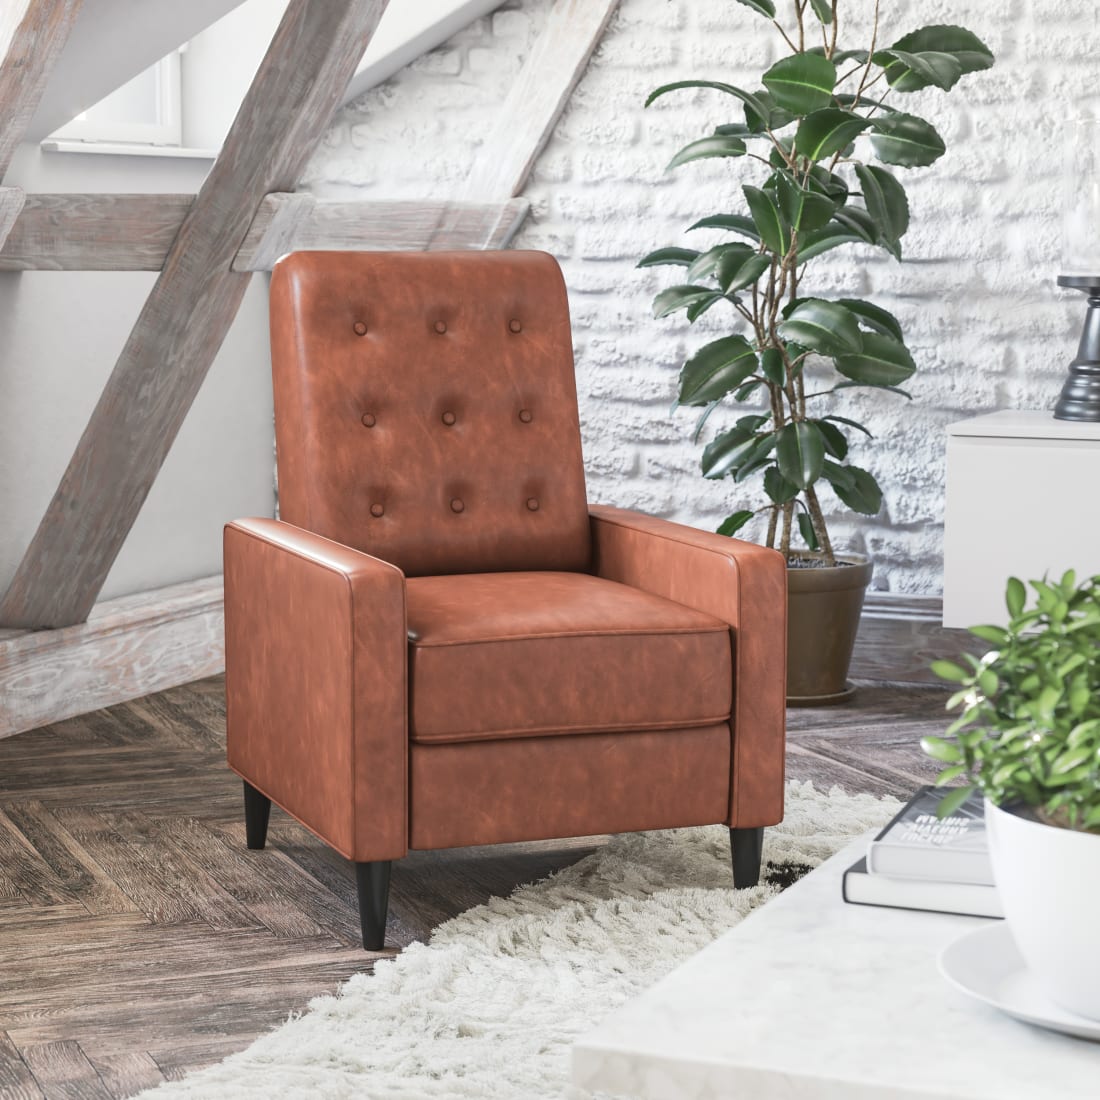 Ezra Mid-Century Modern LeatherSoft Upholstered Button Tufted Pushback Recliner in Cognac Brown for Residential & Commercial Use